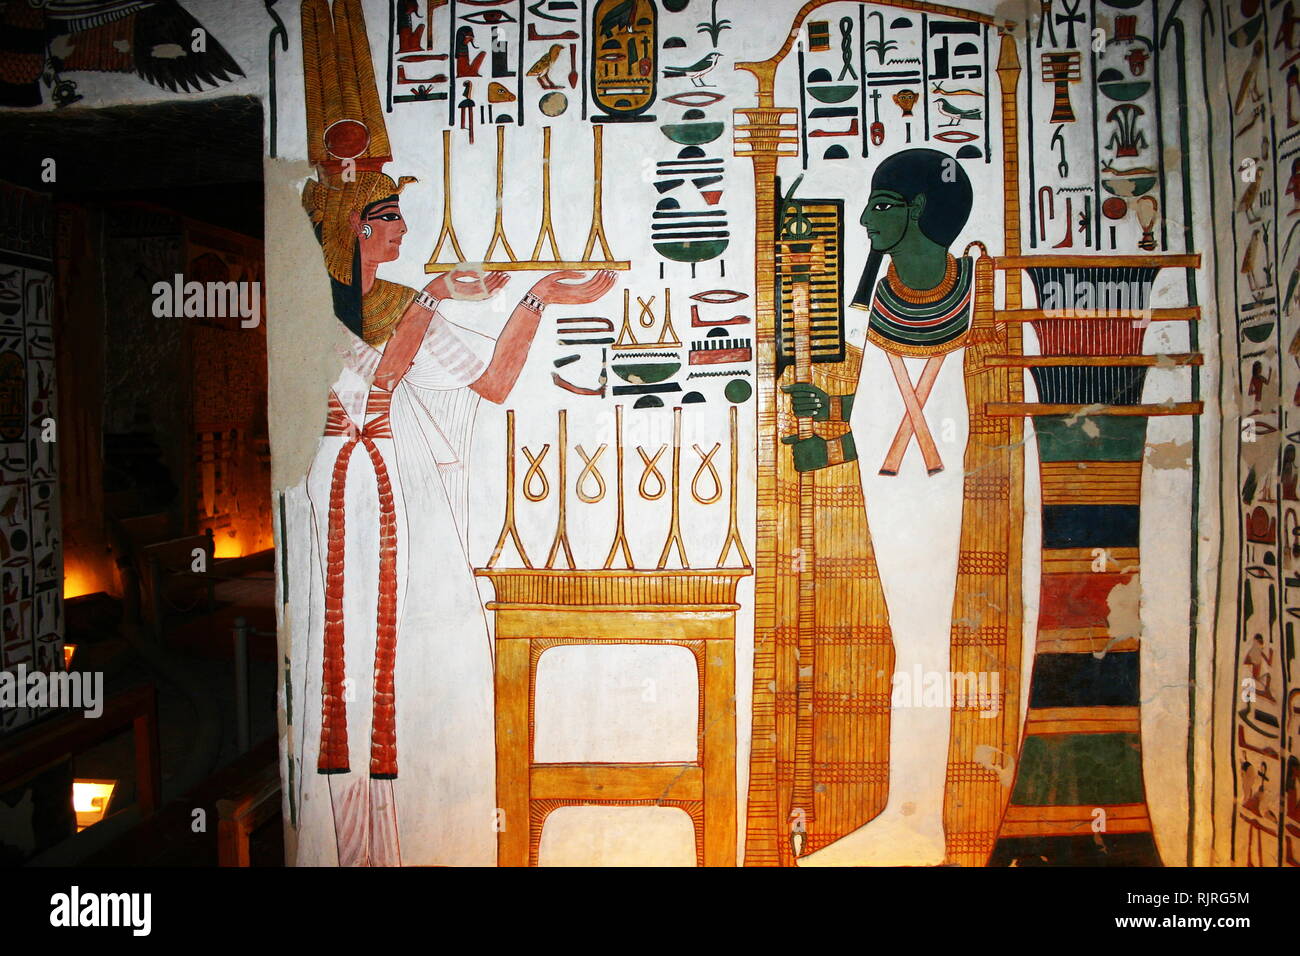 Wall Painting depicting, Nefertari and the God, Ptah. Inside the tomb (QV66) of Nefertari, Great Wife of Pharaoh Ramesses II, in Egypt's Valley of the Queens. It was discovered by Ernesto Schiaparelli in 1904. It is called the Sistine Chapel of Ancient Egypt. In the Valley of the Queens, Nefertari's tomb once held the mummified body and representative symbolisms of her, like what most Egyptian tombs consisted of. Now, everything had been looted except for two thirds of the 5,200 square feet of wall paintings. ca. 1255 BC Stock Photo